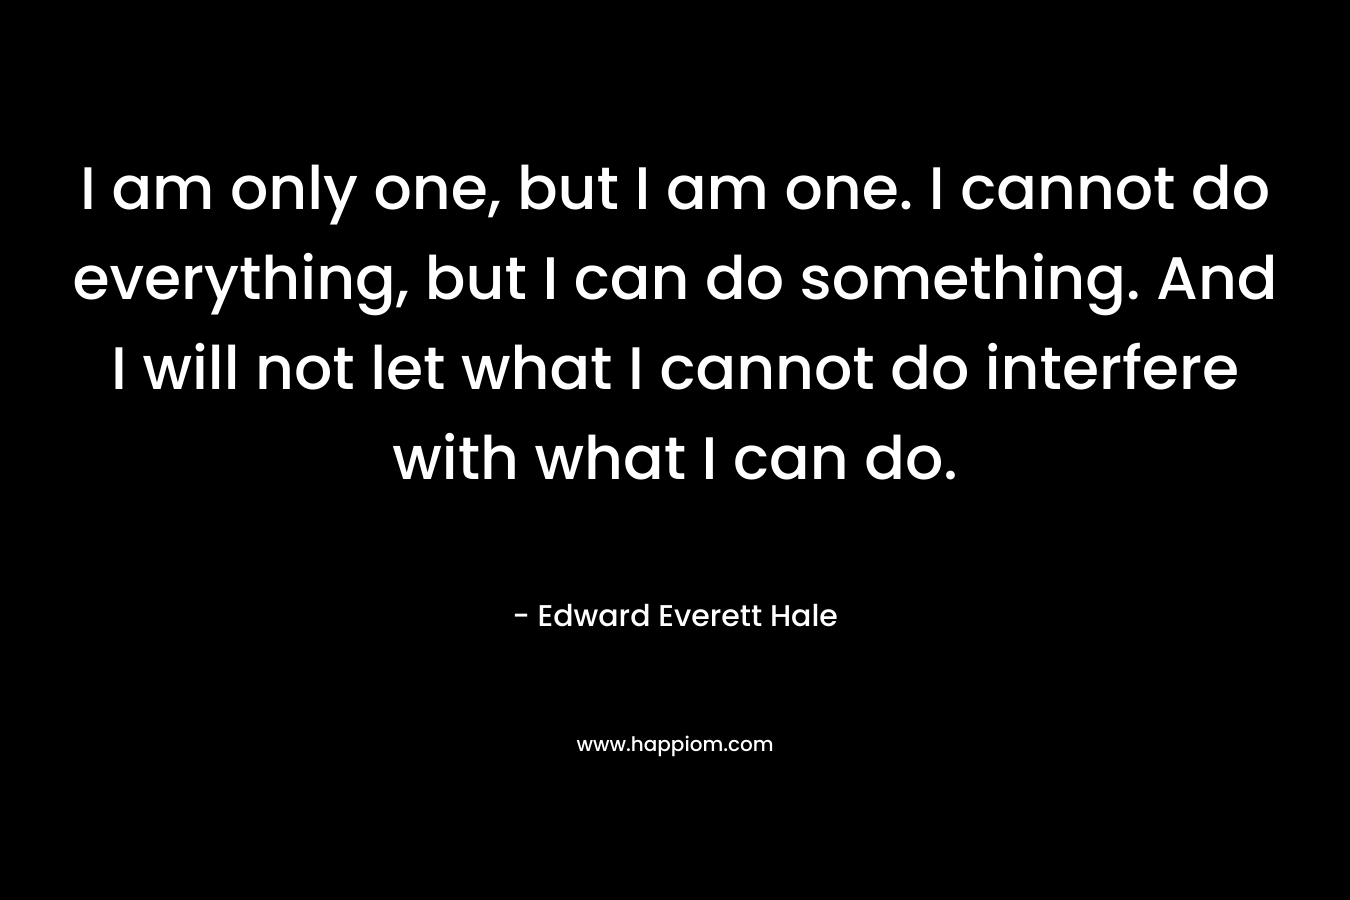 I am only one, but I am one. I cannot do everything, but I can do something. And I will not let what I cannot do interfere with what I can do.